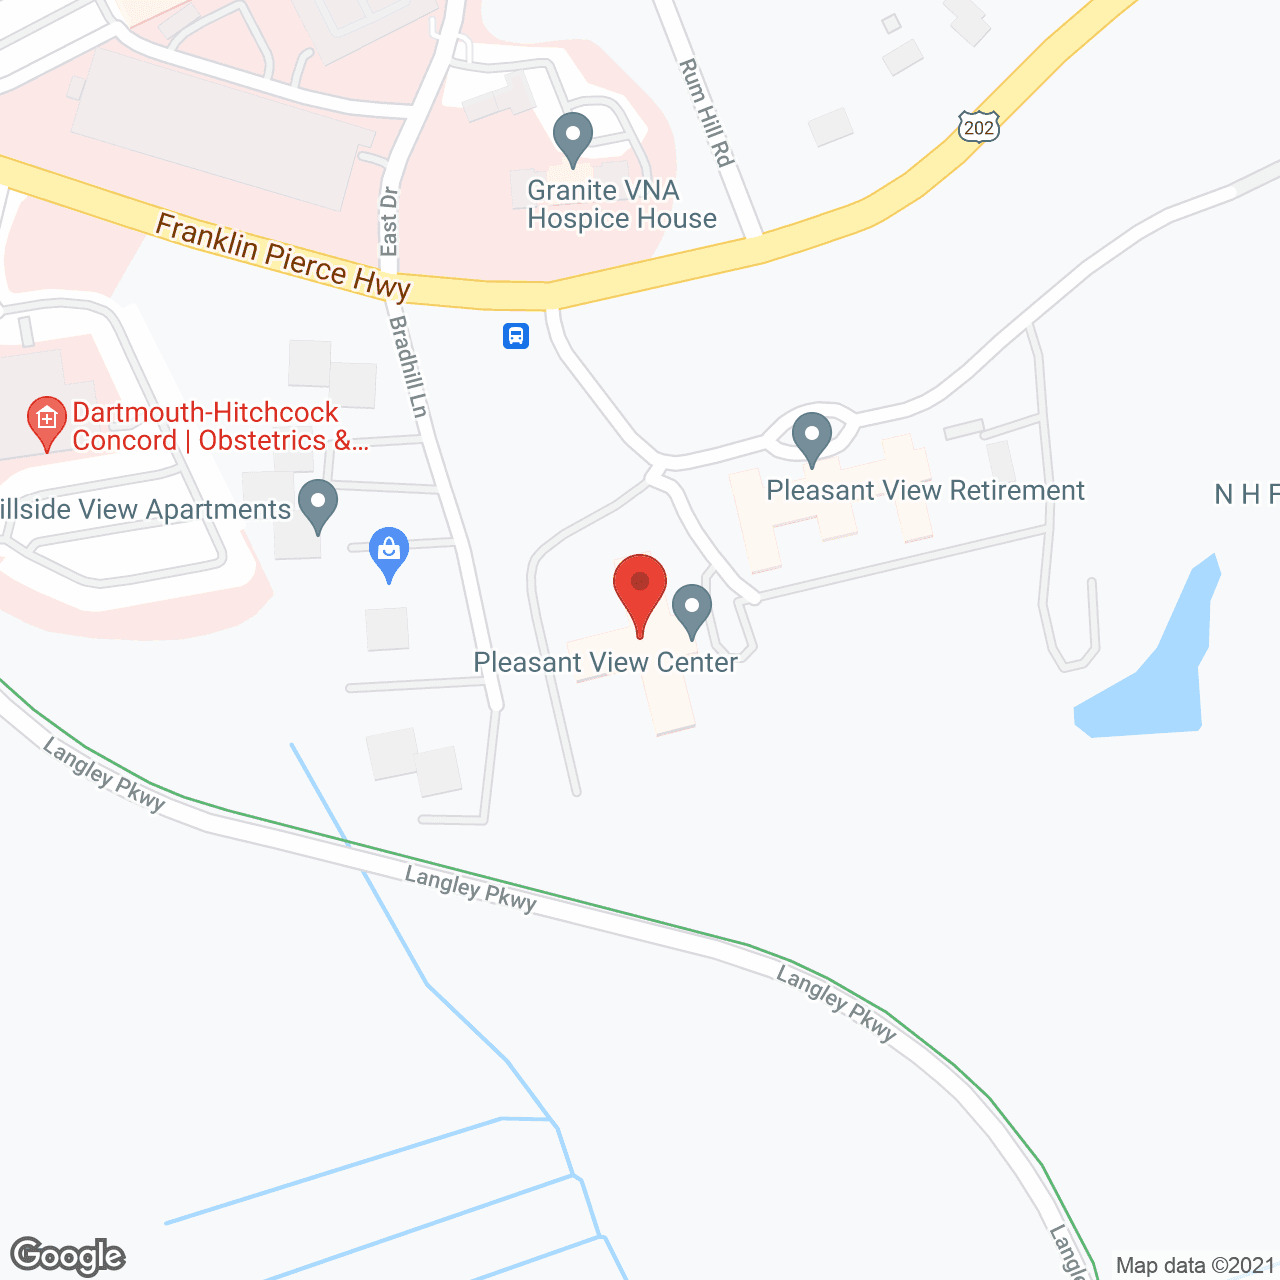 Pleasant View Center in google map